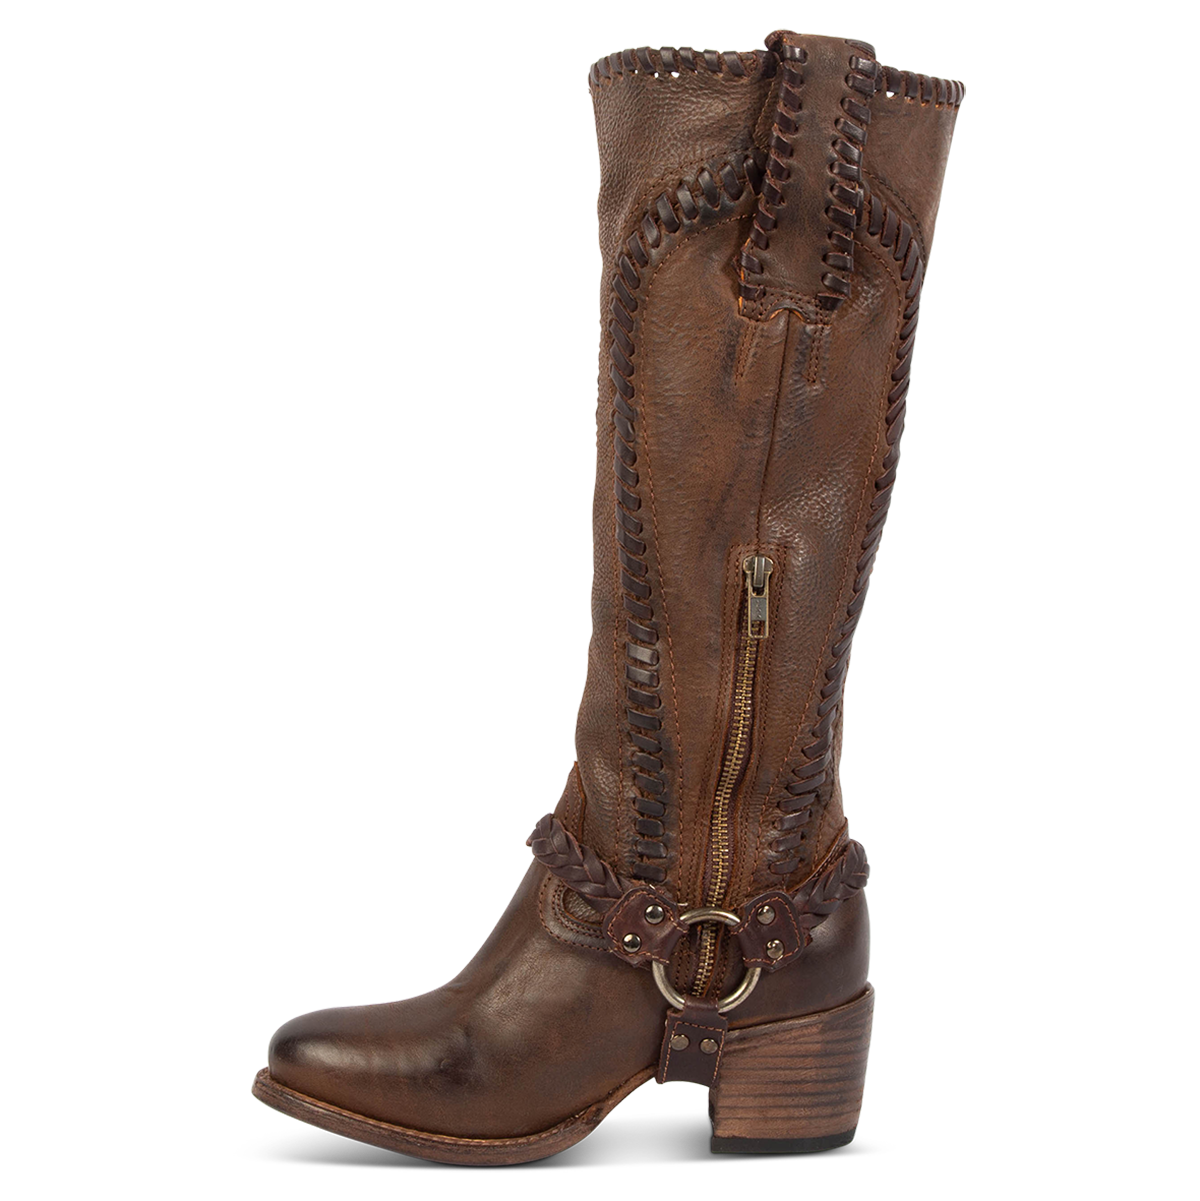 Side view showing leather pull straps, inside working brass zipper, and braided ankle harness on FREEBIRD women's Clover brown leather boot